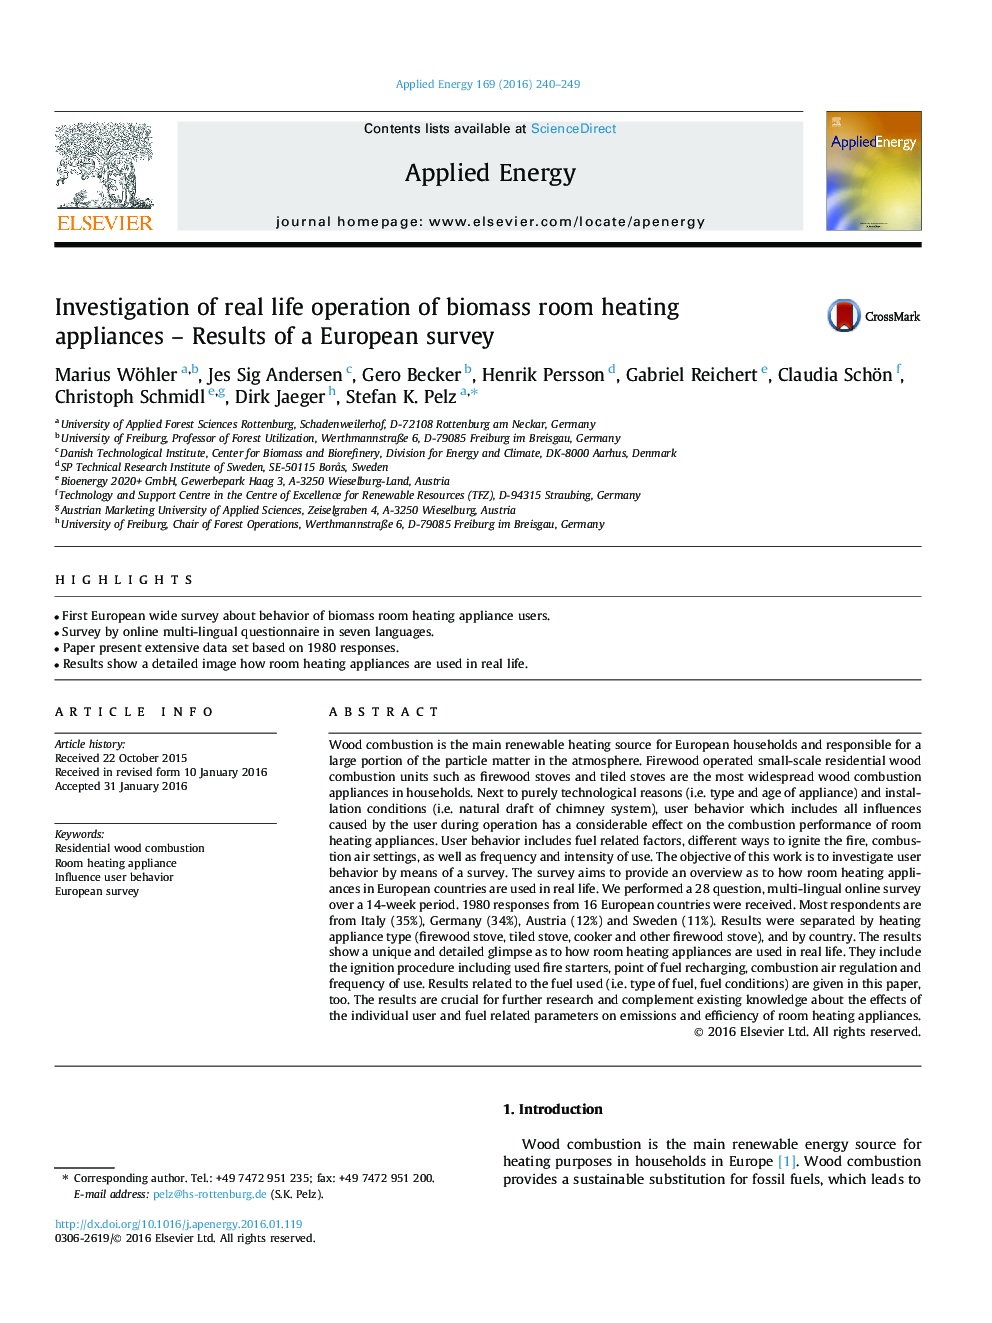 Investigation of real life operation of biomass room heating appliances - Results of a European survey